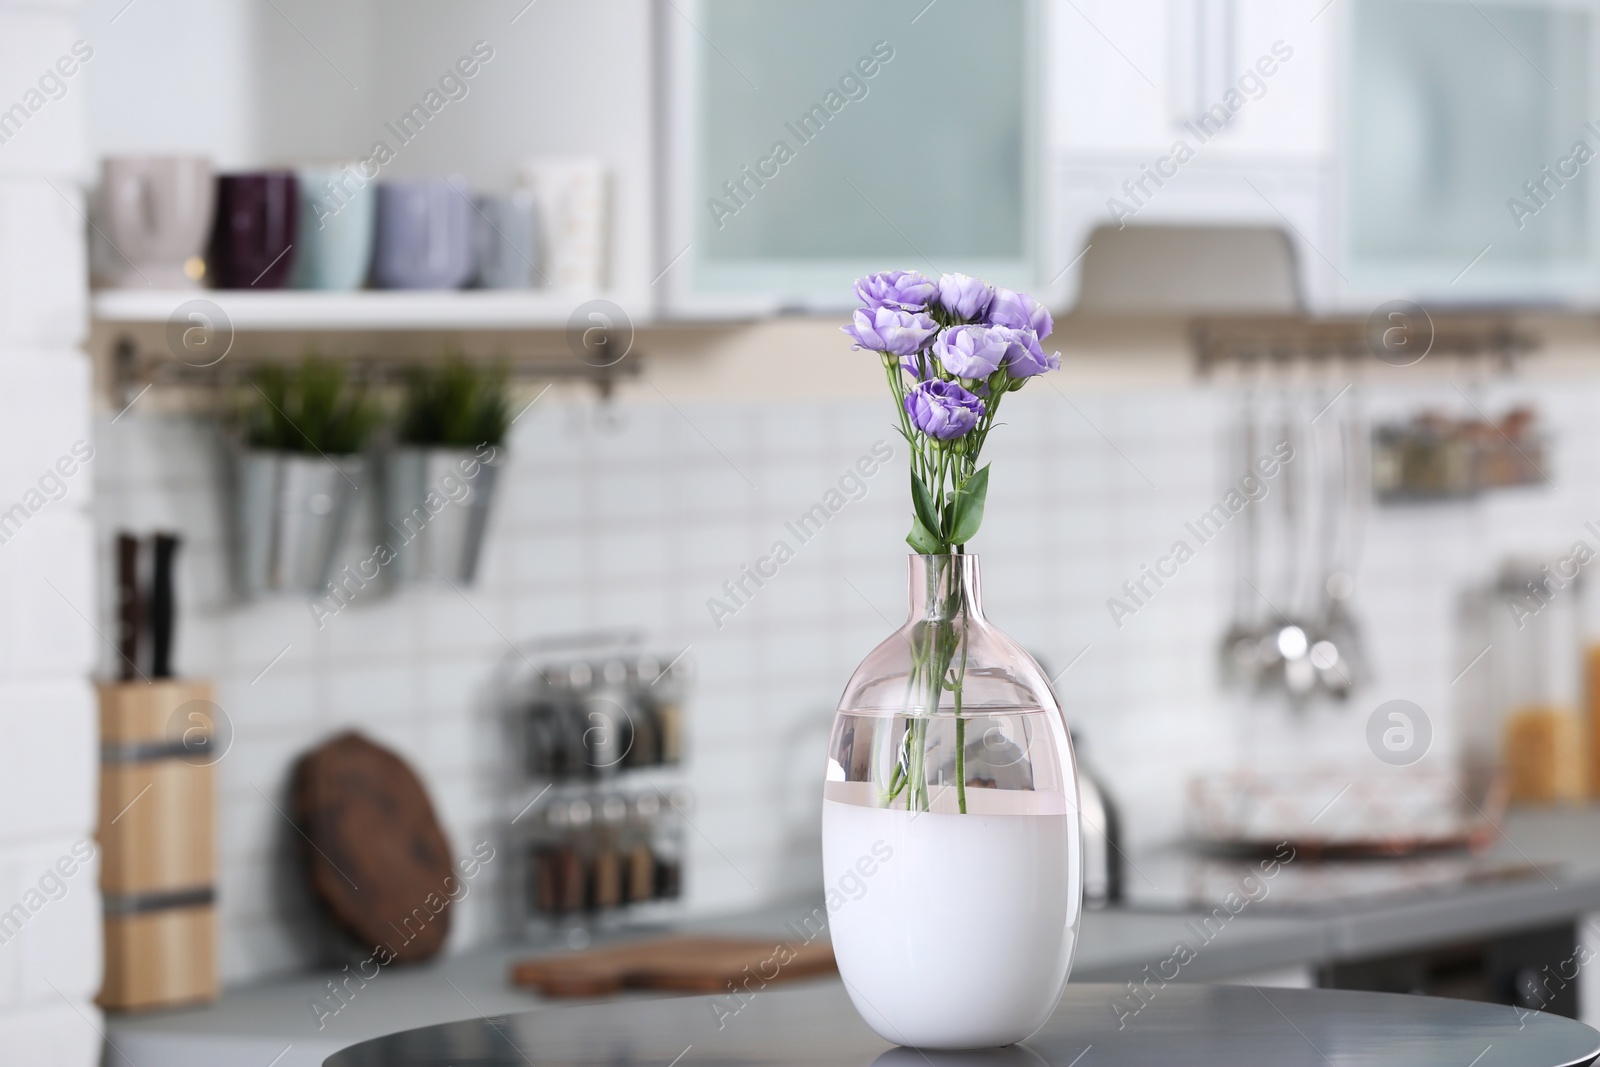 Photo of Vase with beautiful flowers on table in kitchen interior